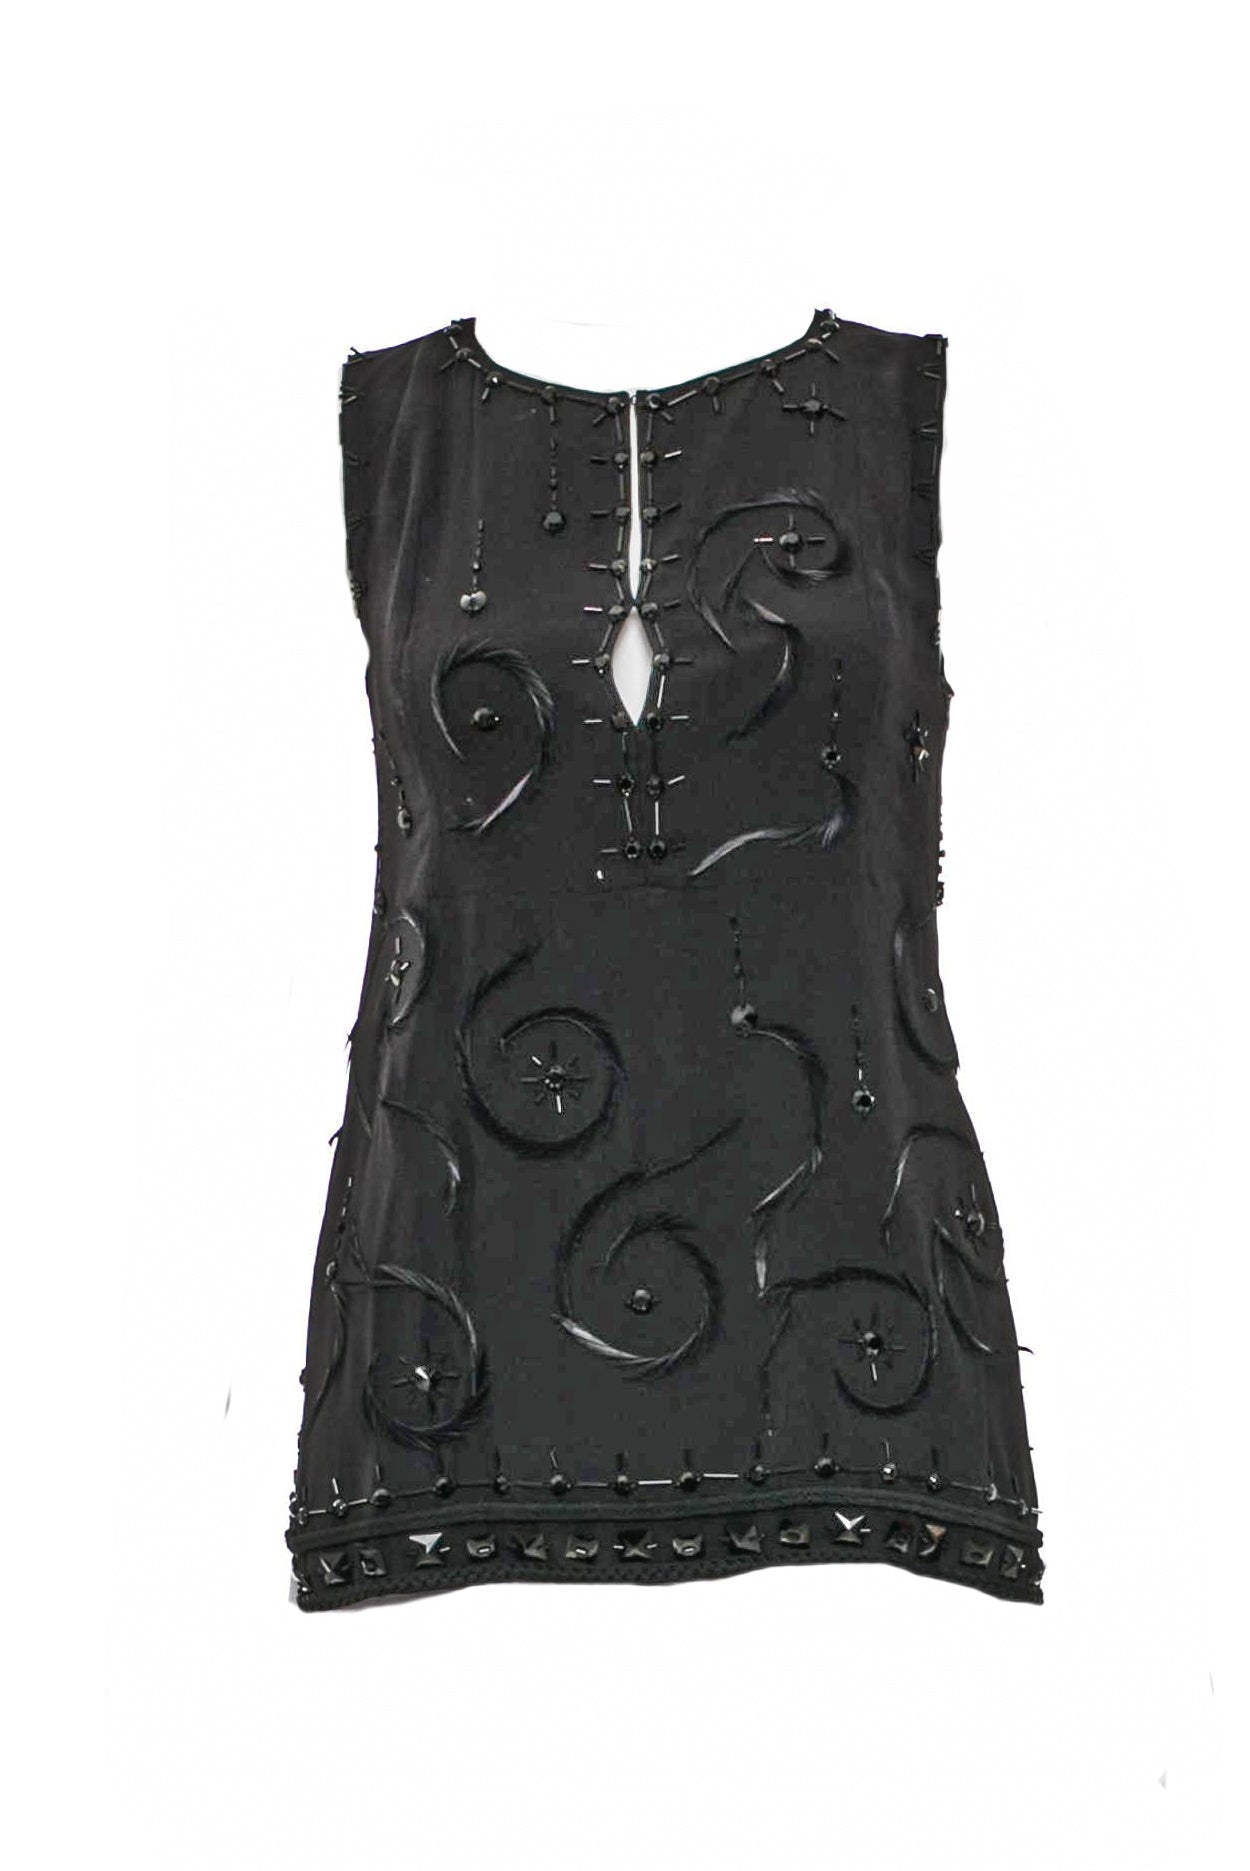 Prada Black Chiffon Tank Top with Beads and Feathers - BOUTIQUE